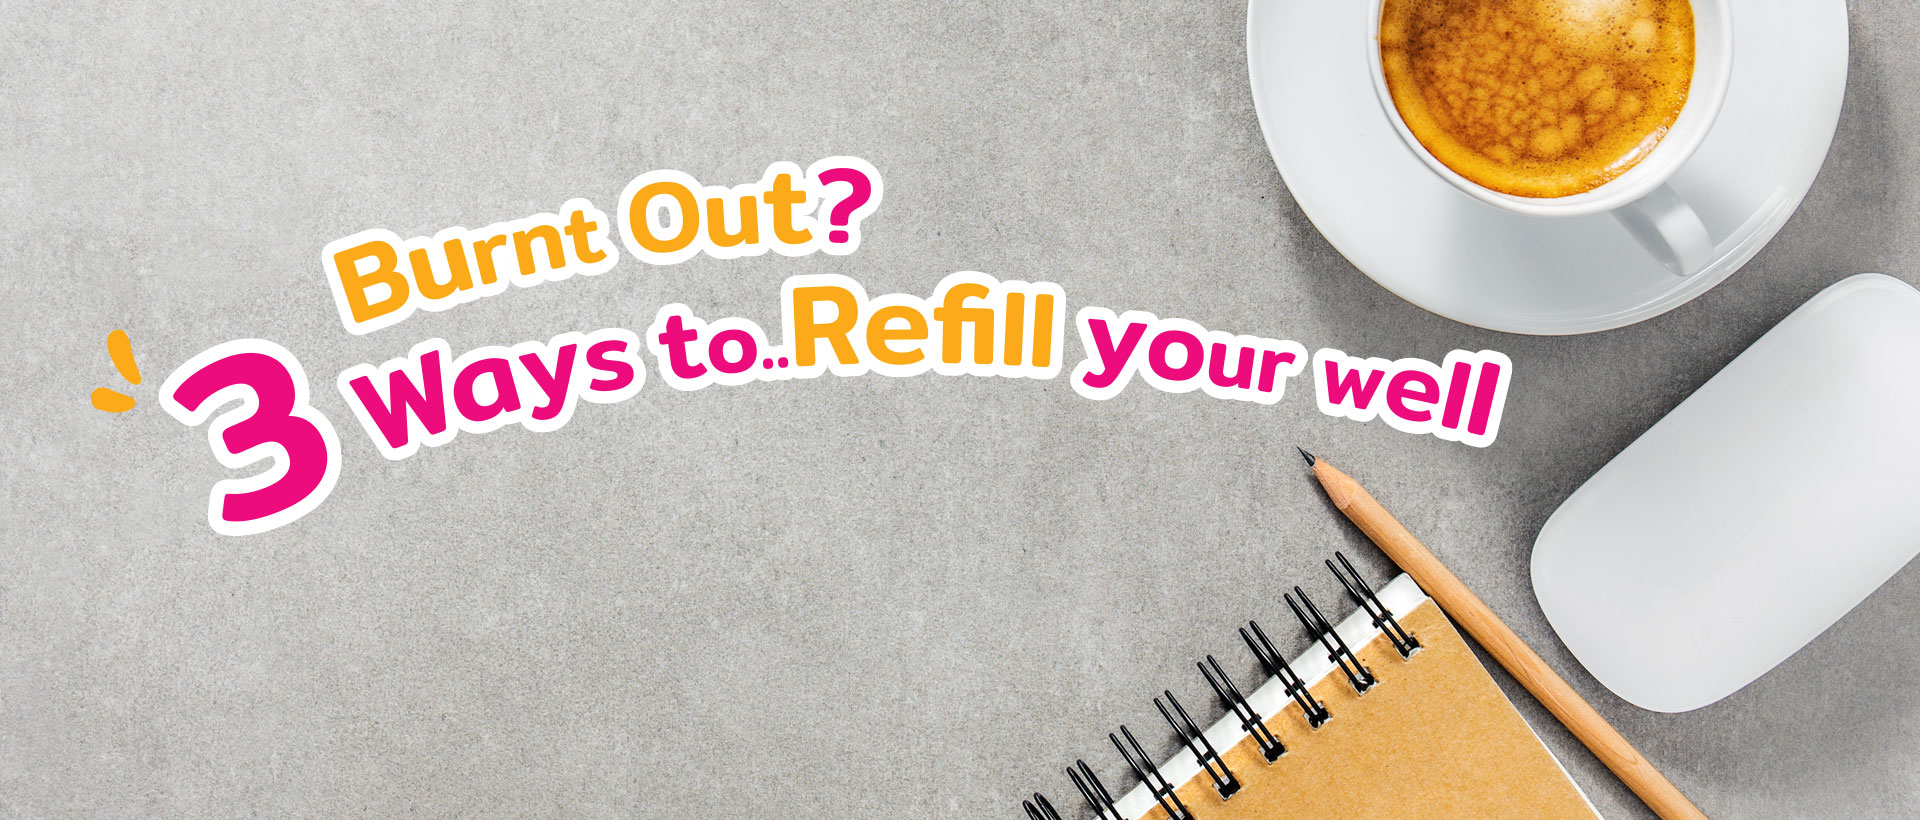 Burnt out? 3 ways to refill your well